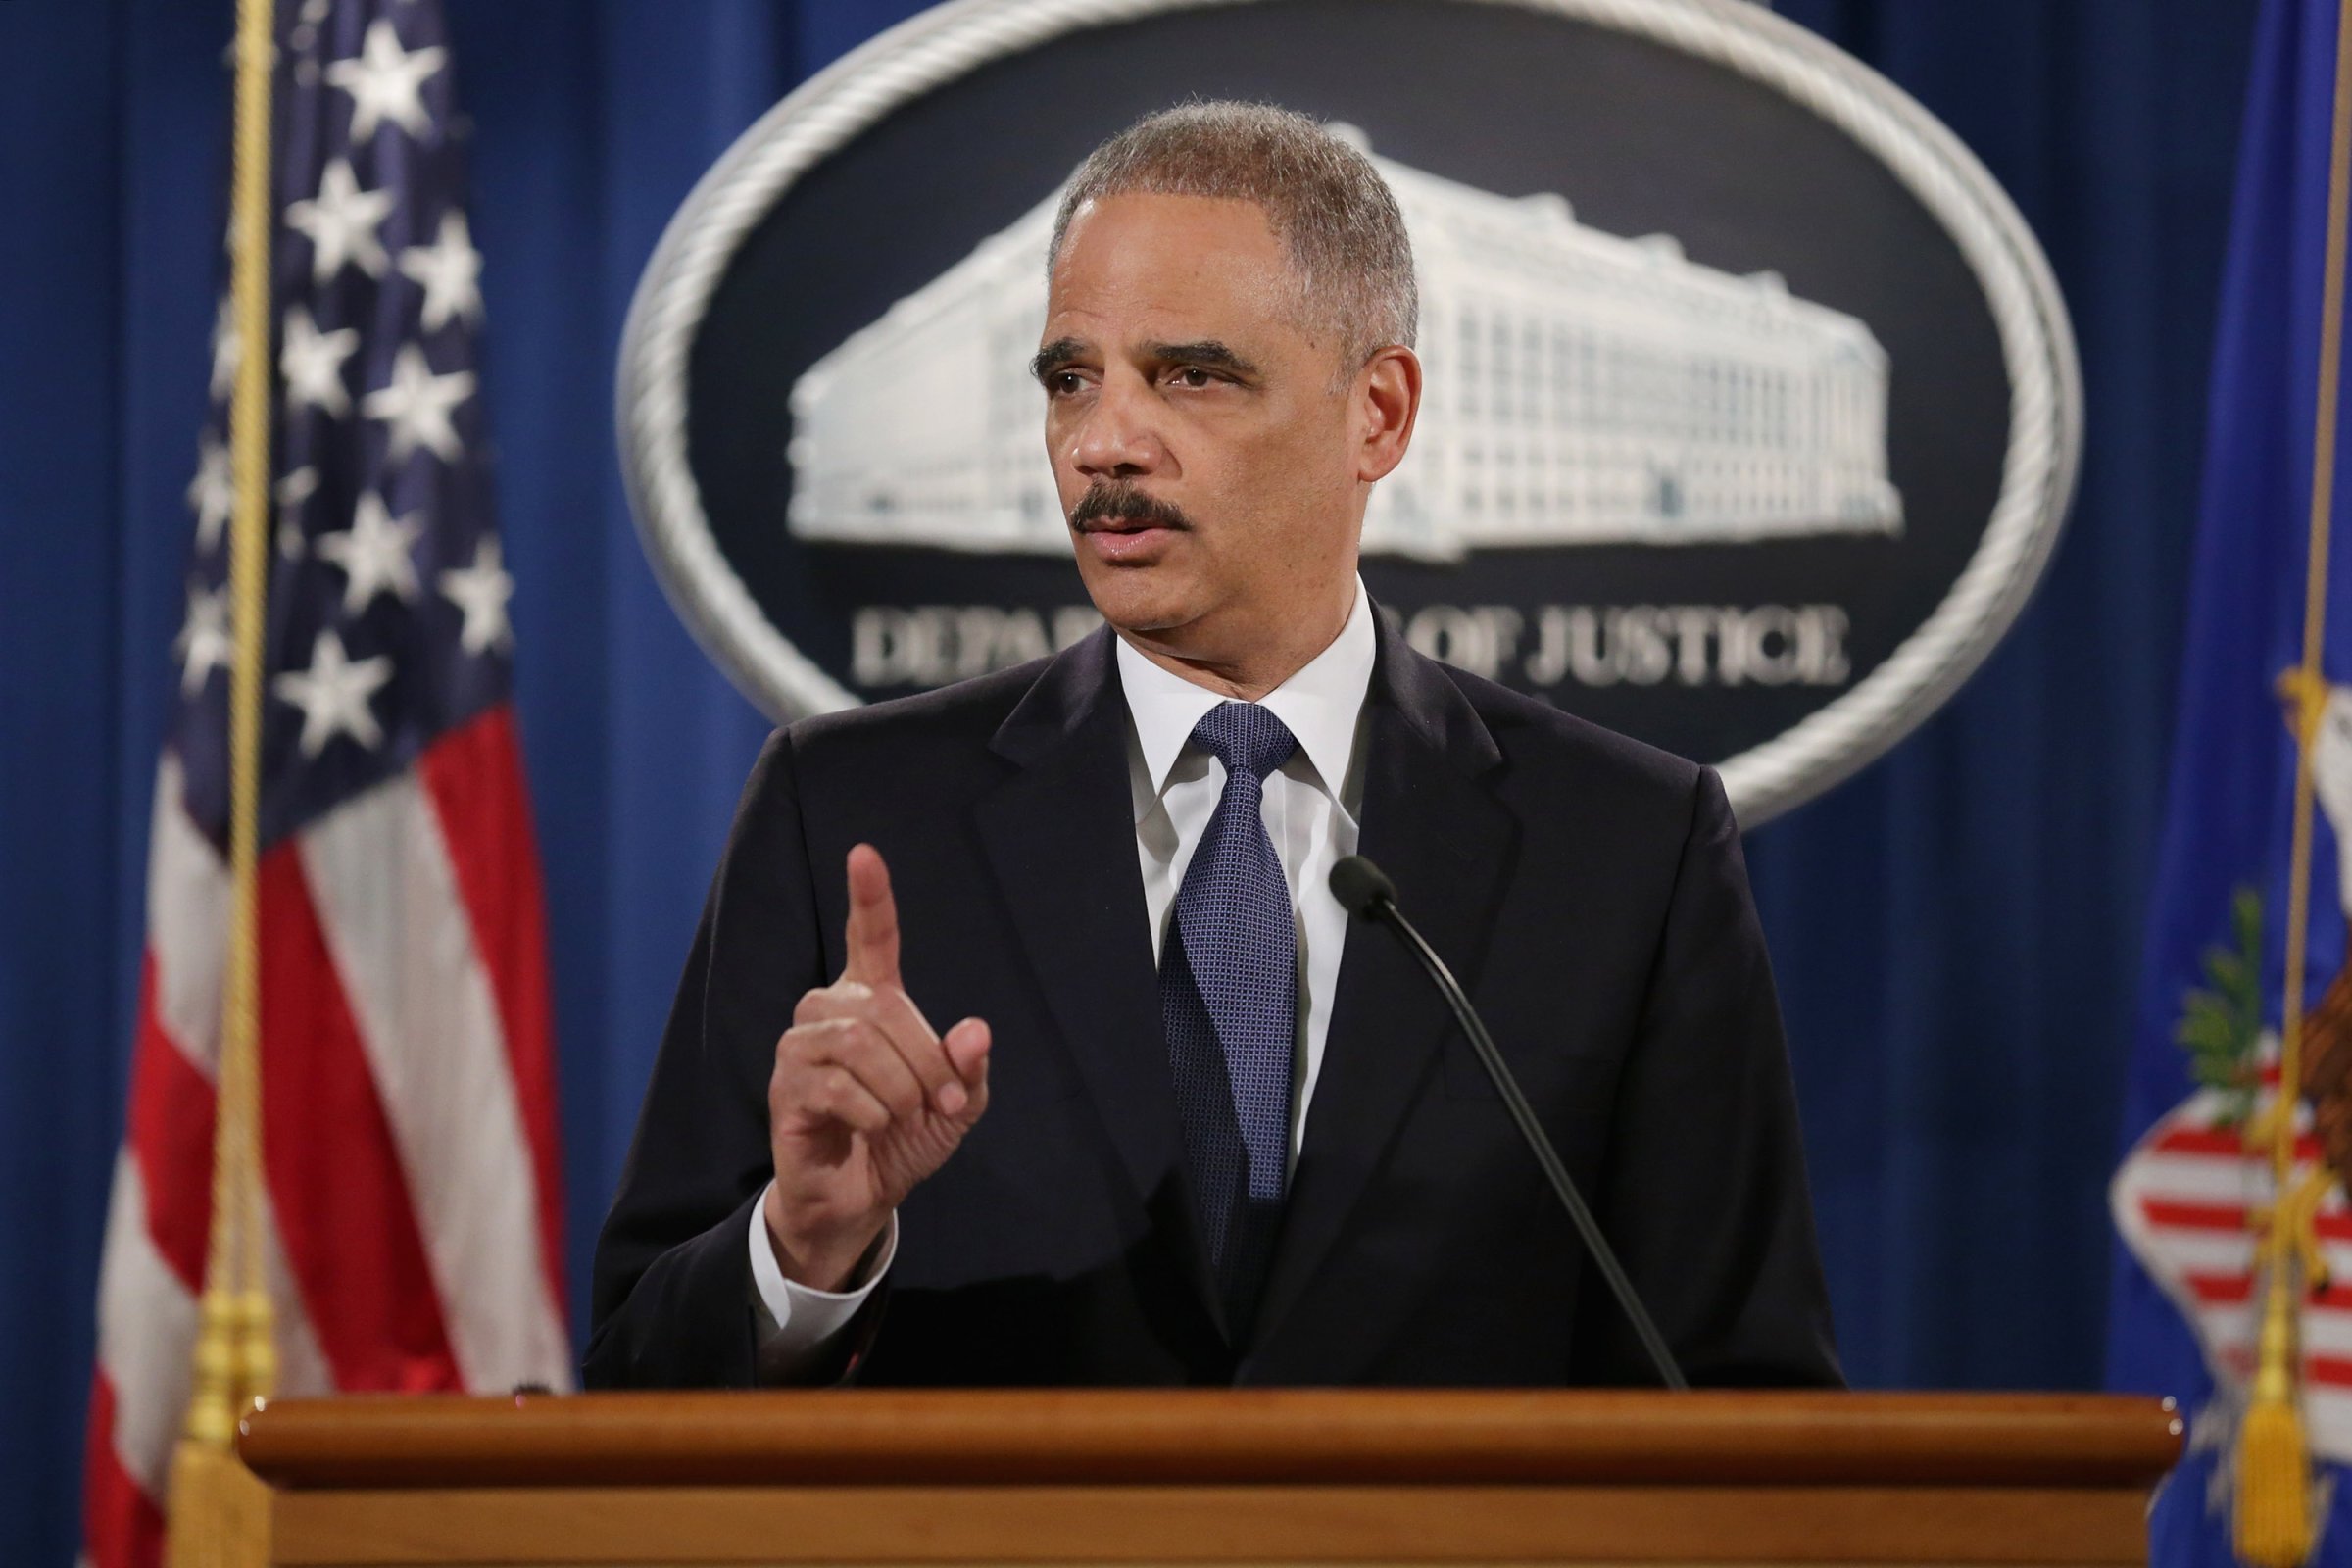 Attorney General Eric Holder delivers remarks about the Justice DepartmentÕs findings related to two investigations in Ferguson, Missouri, at the Robert F. Kennedy Department of Justice Building March 4, 2015 in Washington, DC. Holder delivered the remarks for an audience of department employees who worked on the investigations after a white police officer shot and killed an unarmed black teenager, sparking weeks of demonstrations and violent clashes.